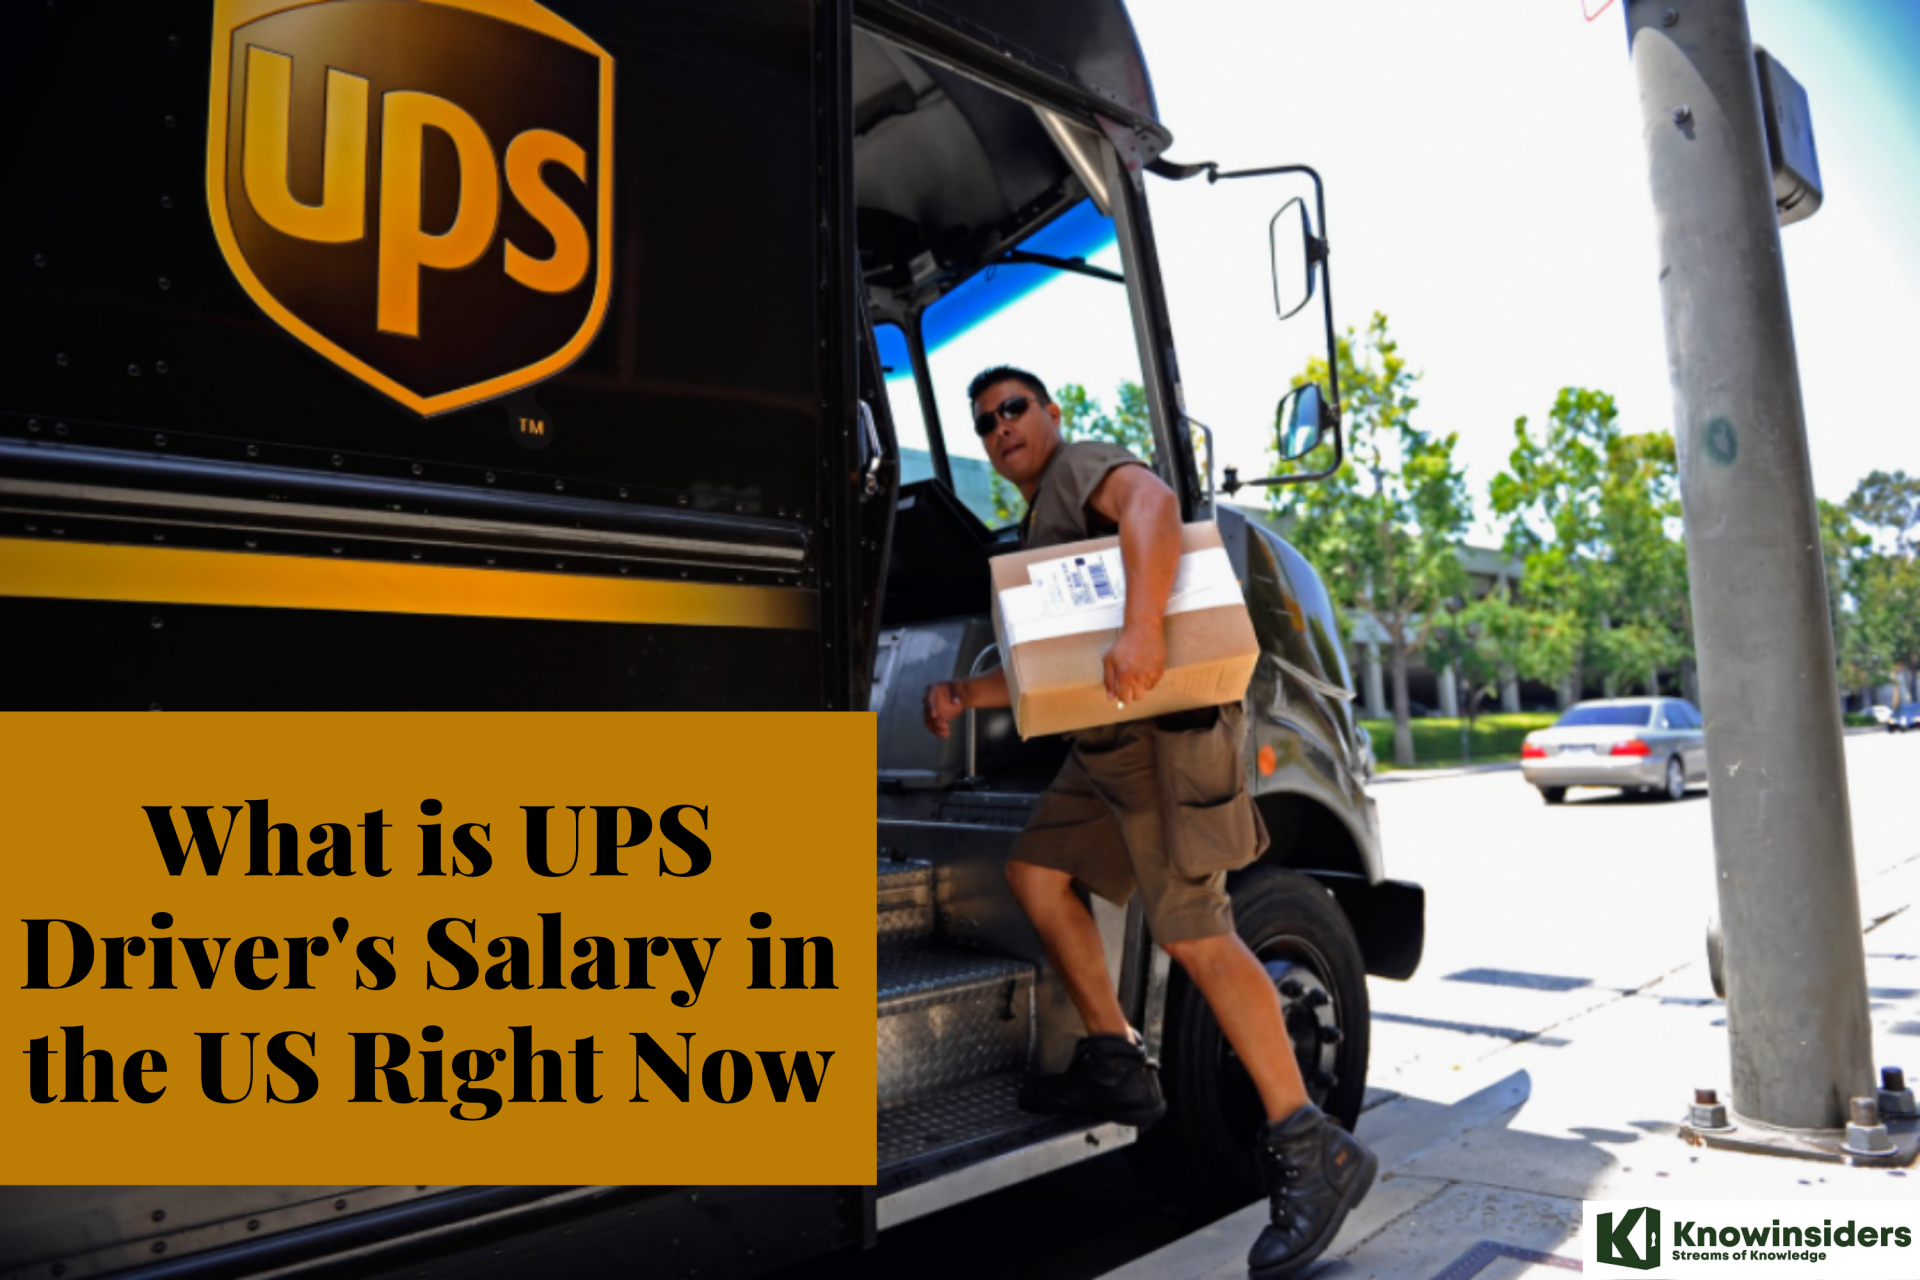 What is UPS Driver's Salary in the US Right Now